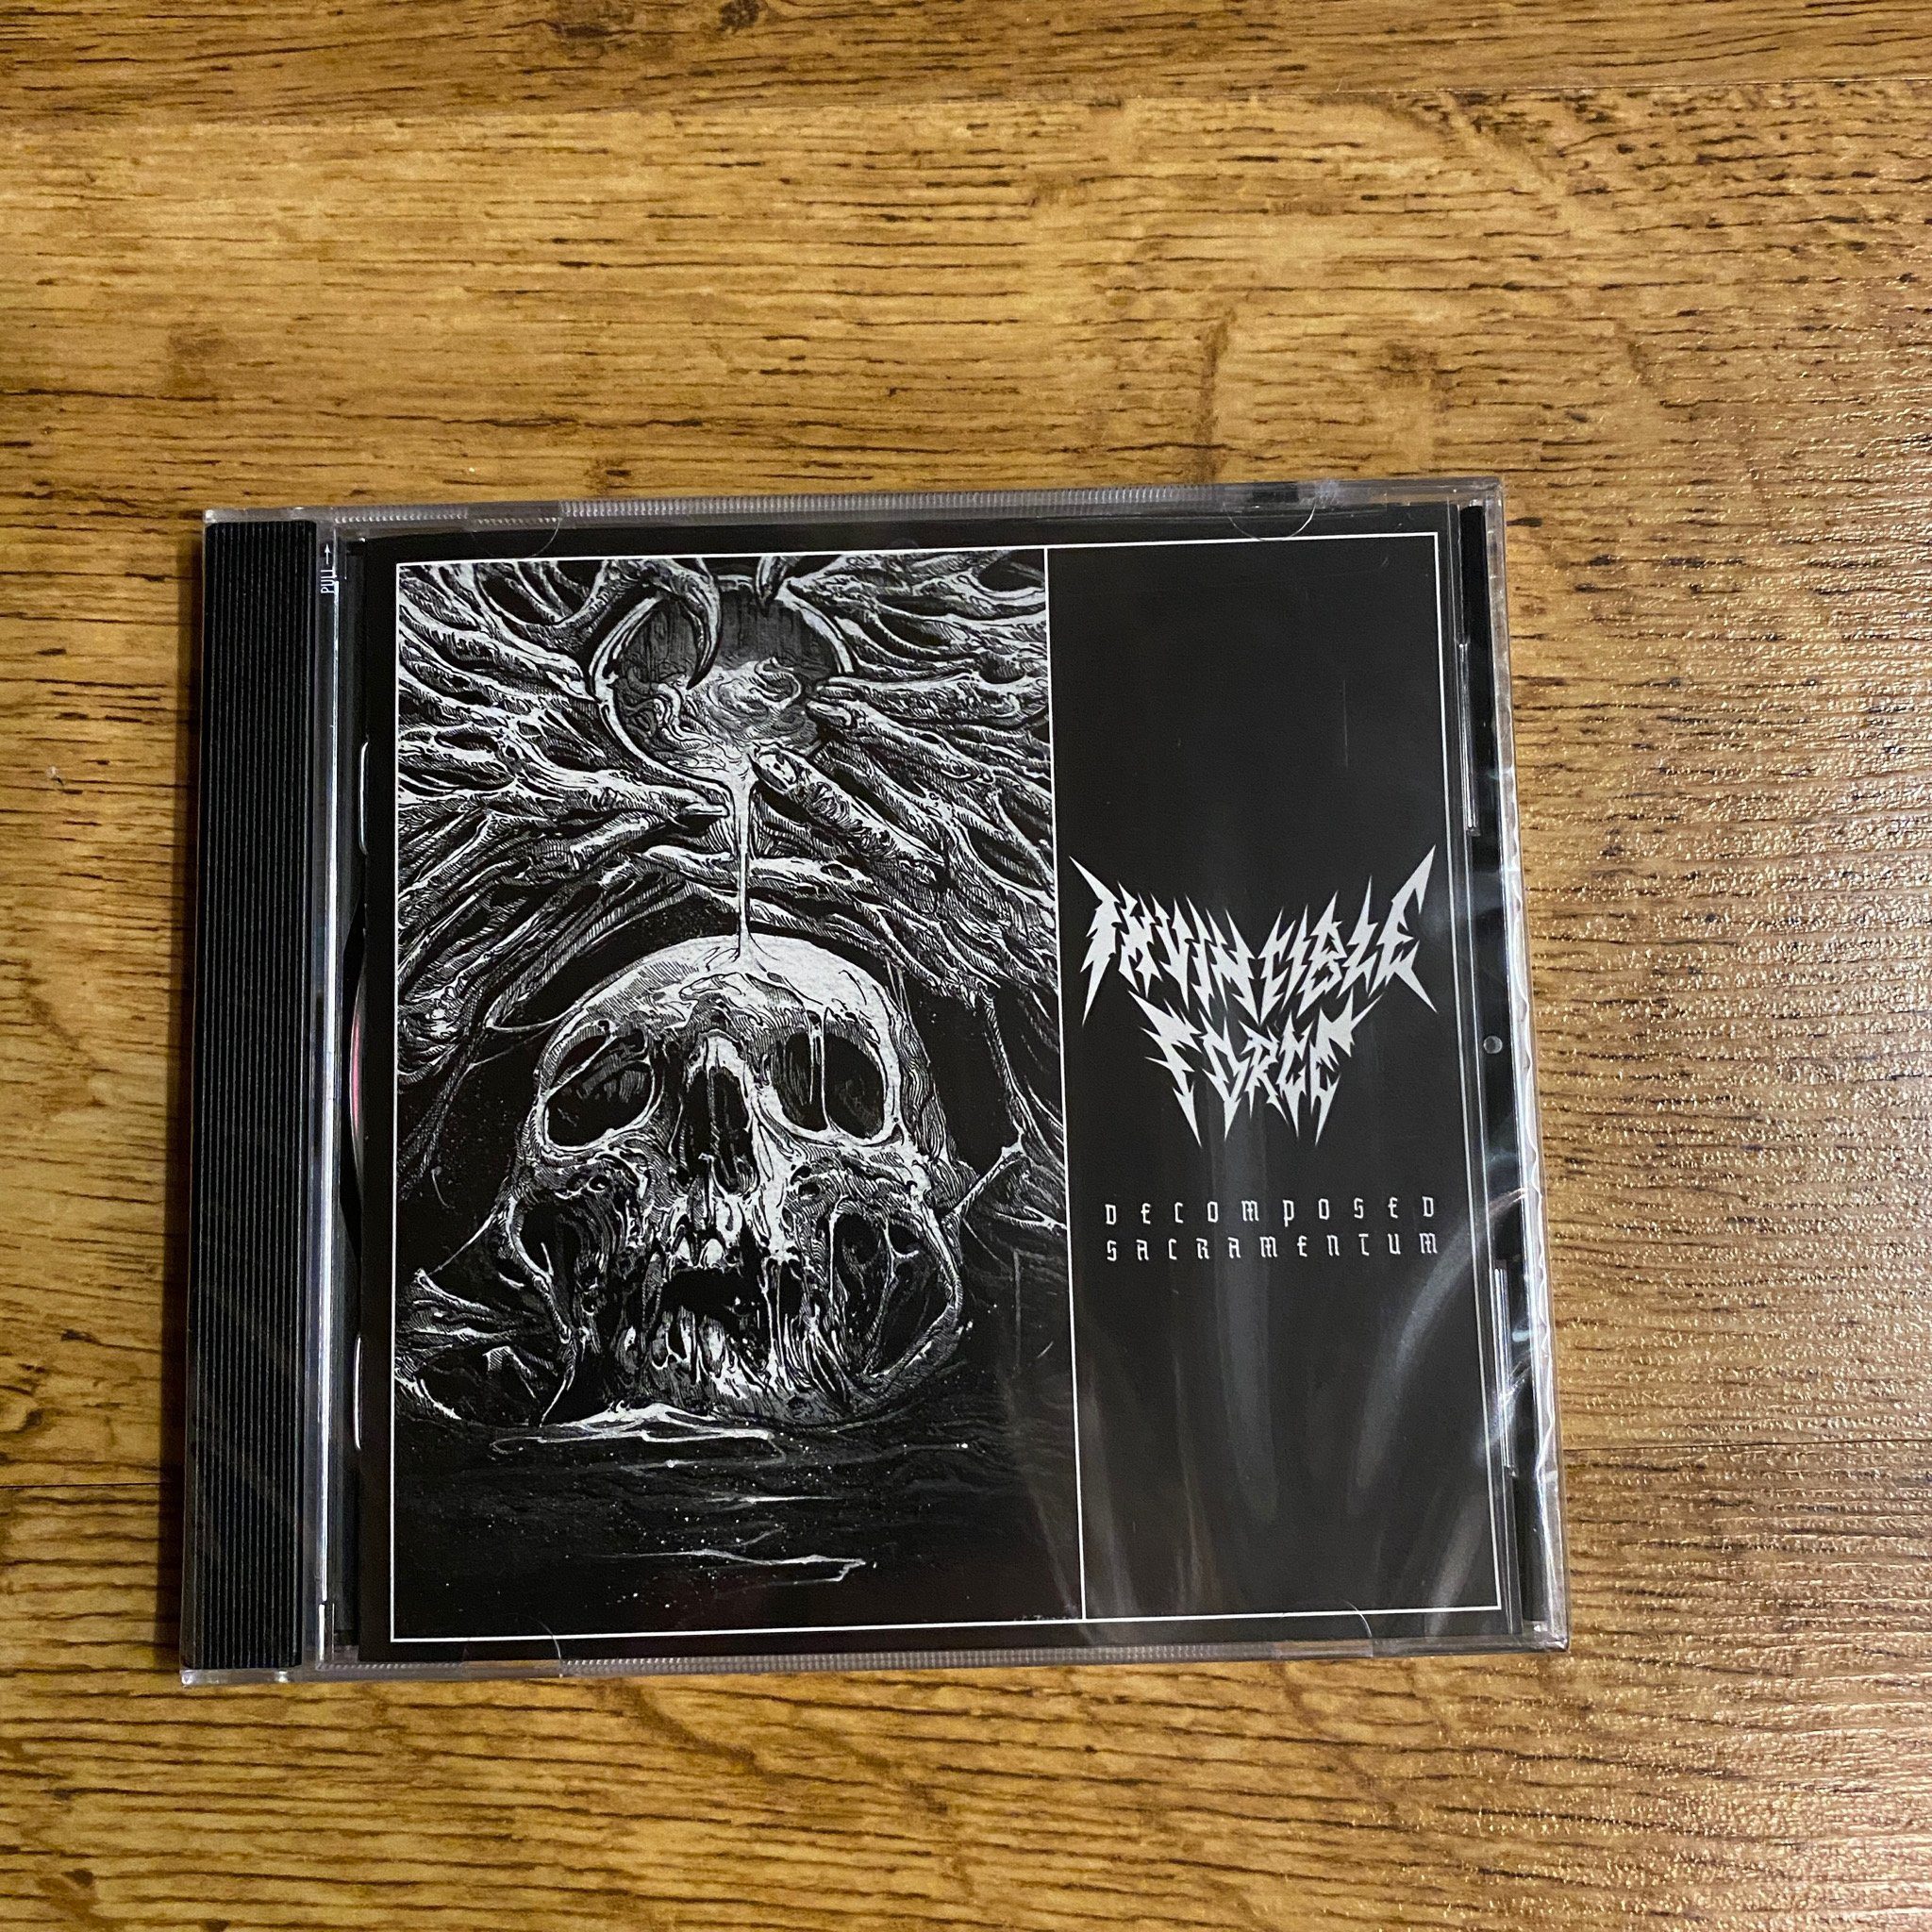 Photo of the Invincible Force - "Decomposed Sacramentum" CD